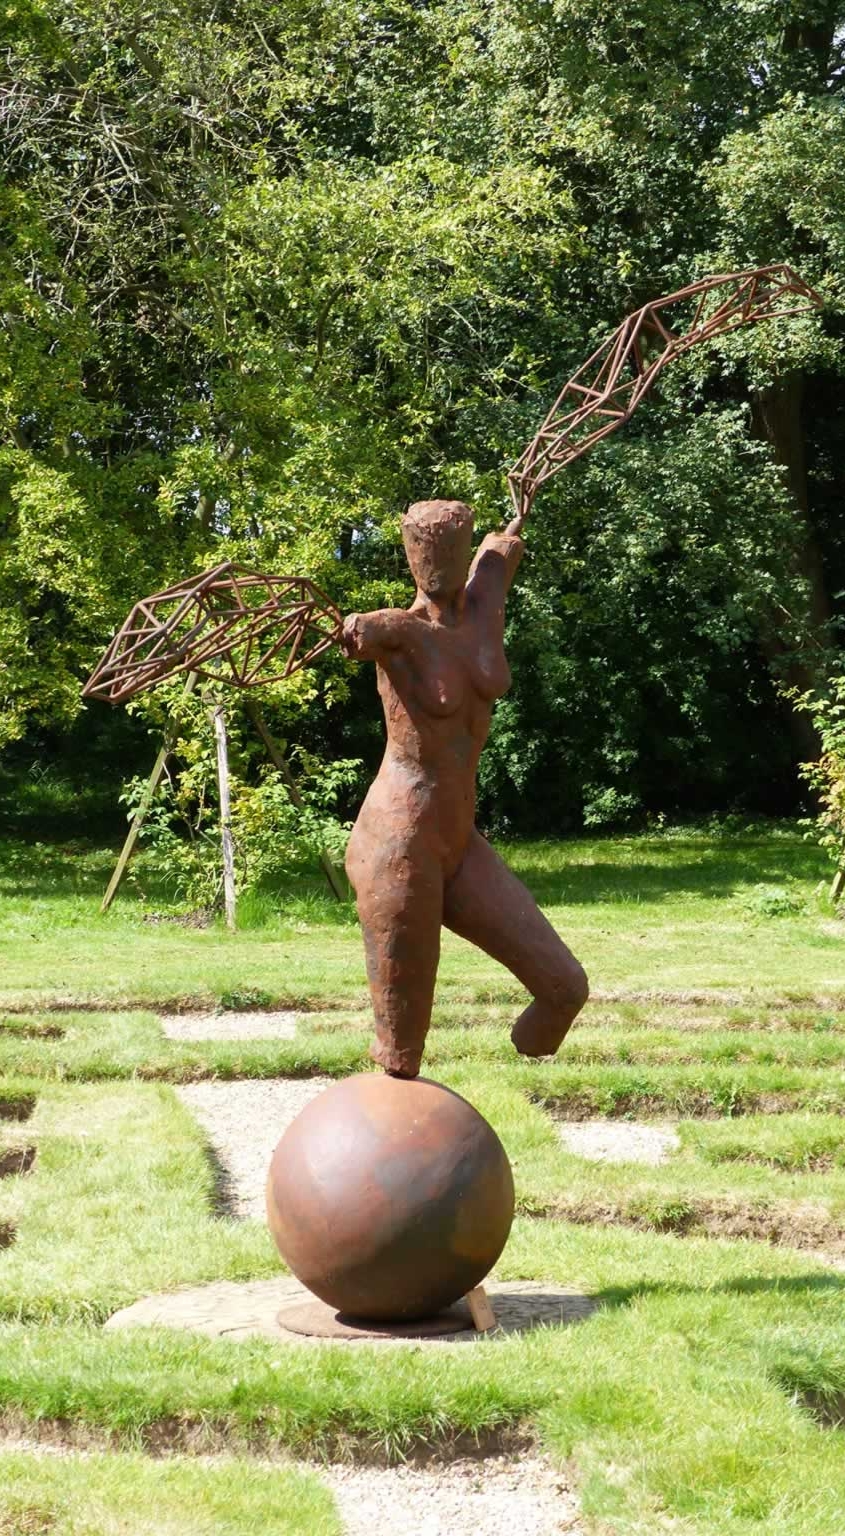 Arc I at Doddington Hall (abstract figurative sculpture) by sculptor Ian Campbell-Briggs